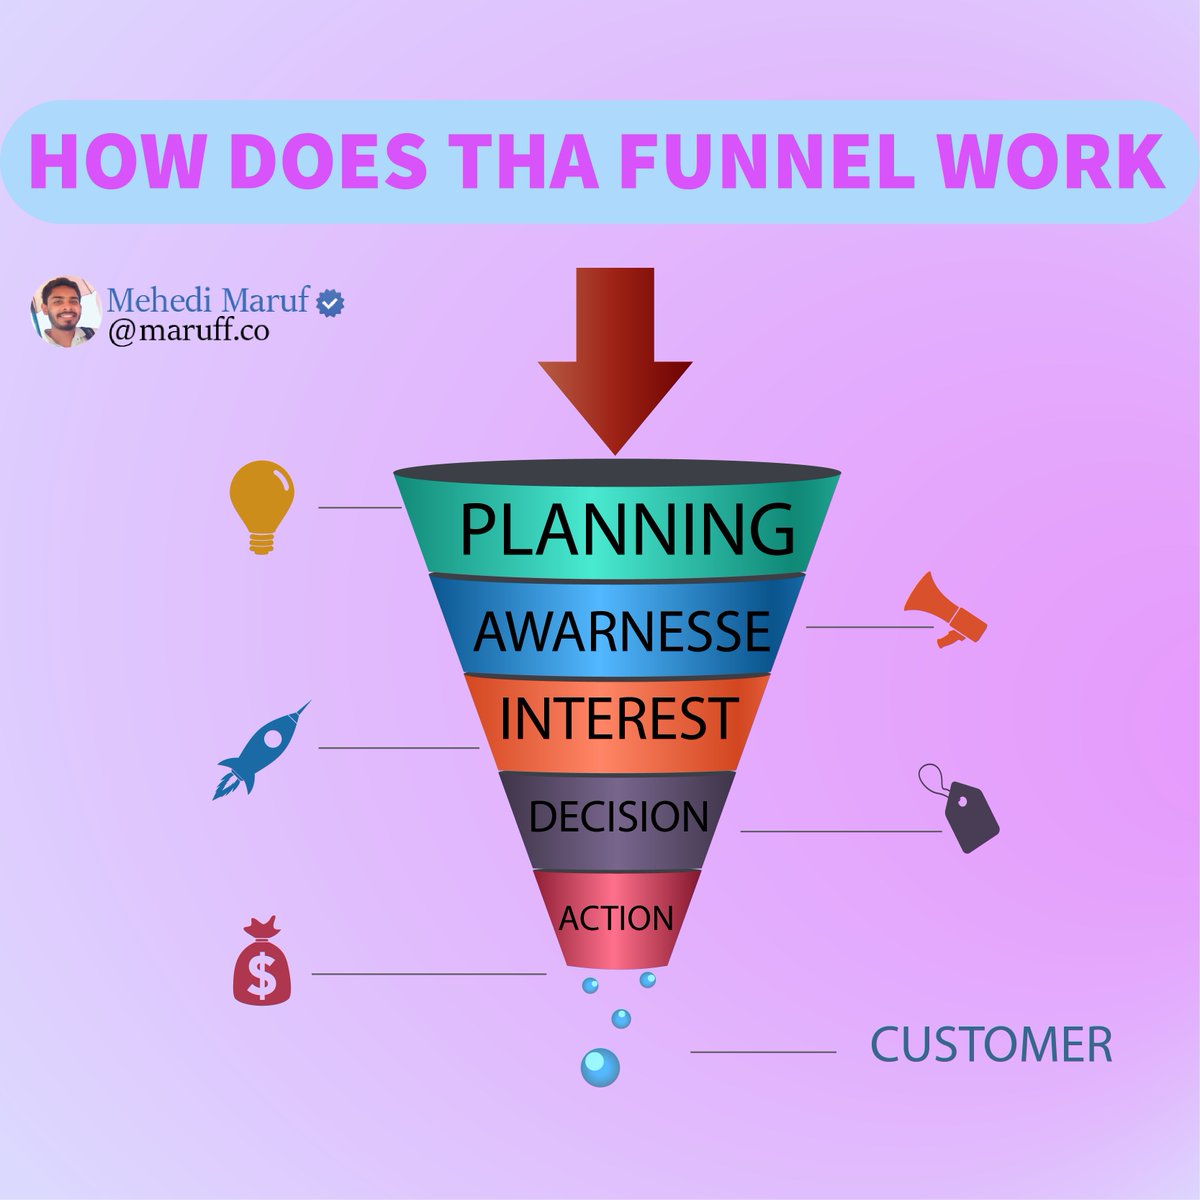 First you need to plan. How to start a new business for Sales.  Please inbox to know about the funnel.
#FunnelMarketing
#SalesFunnel
#MarketingFunnel
#FunnelHacking
#ConversionFunnel
#FunnelStrategy
#facebookmarketing 
#SalesFunnelTips
#DigitalMarketing 
#socialmediamanager